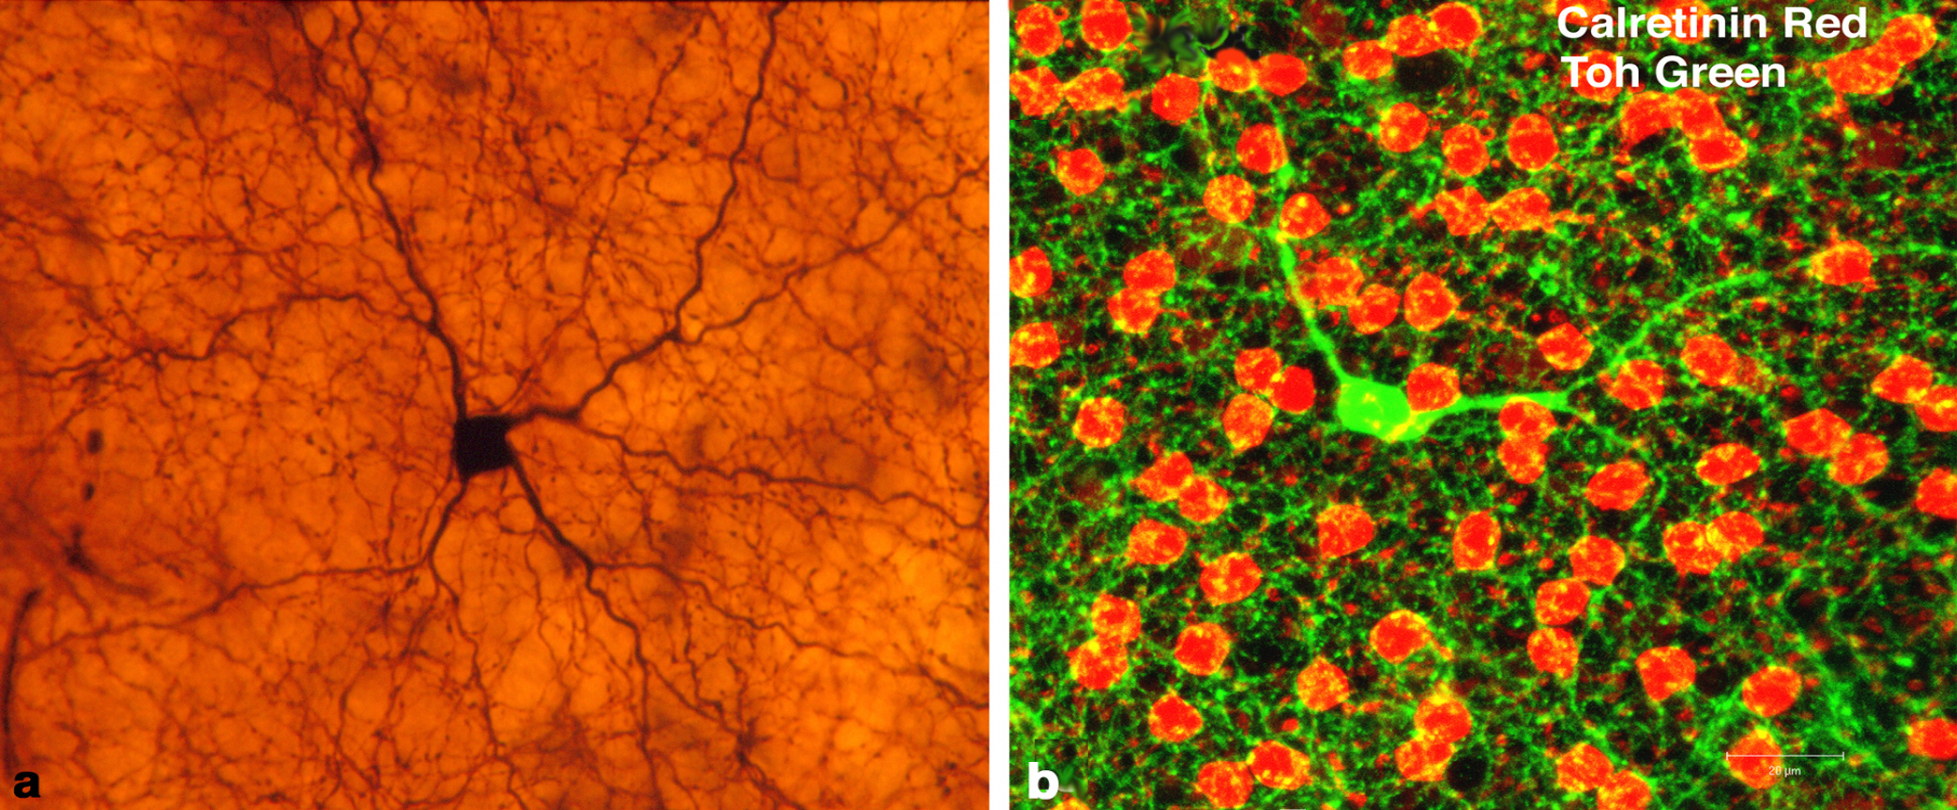 Dopaminergic amacrine cells in animal retina histology samples. Present in both the inner and outer plexiform layers, such cells may be a target for myopia control therapies in the future.